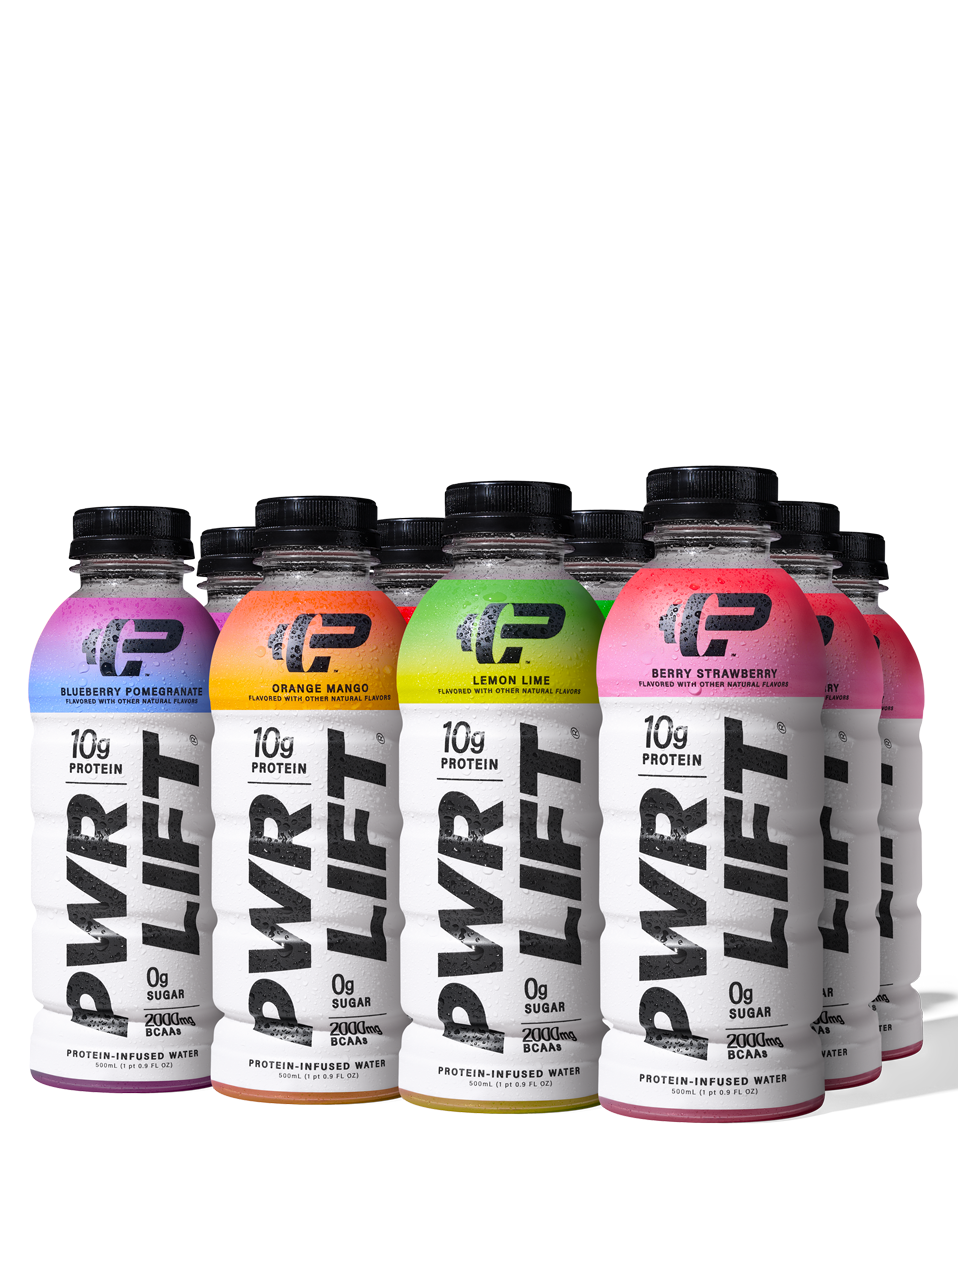 Rows of PWR LIFT bottles in different flavors